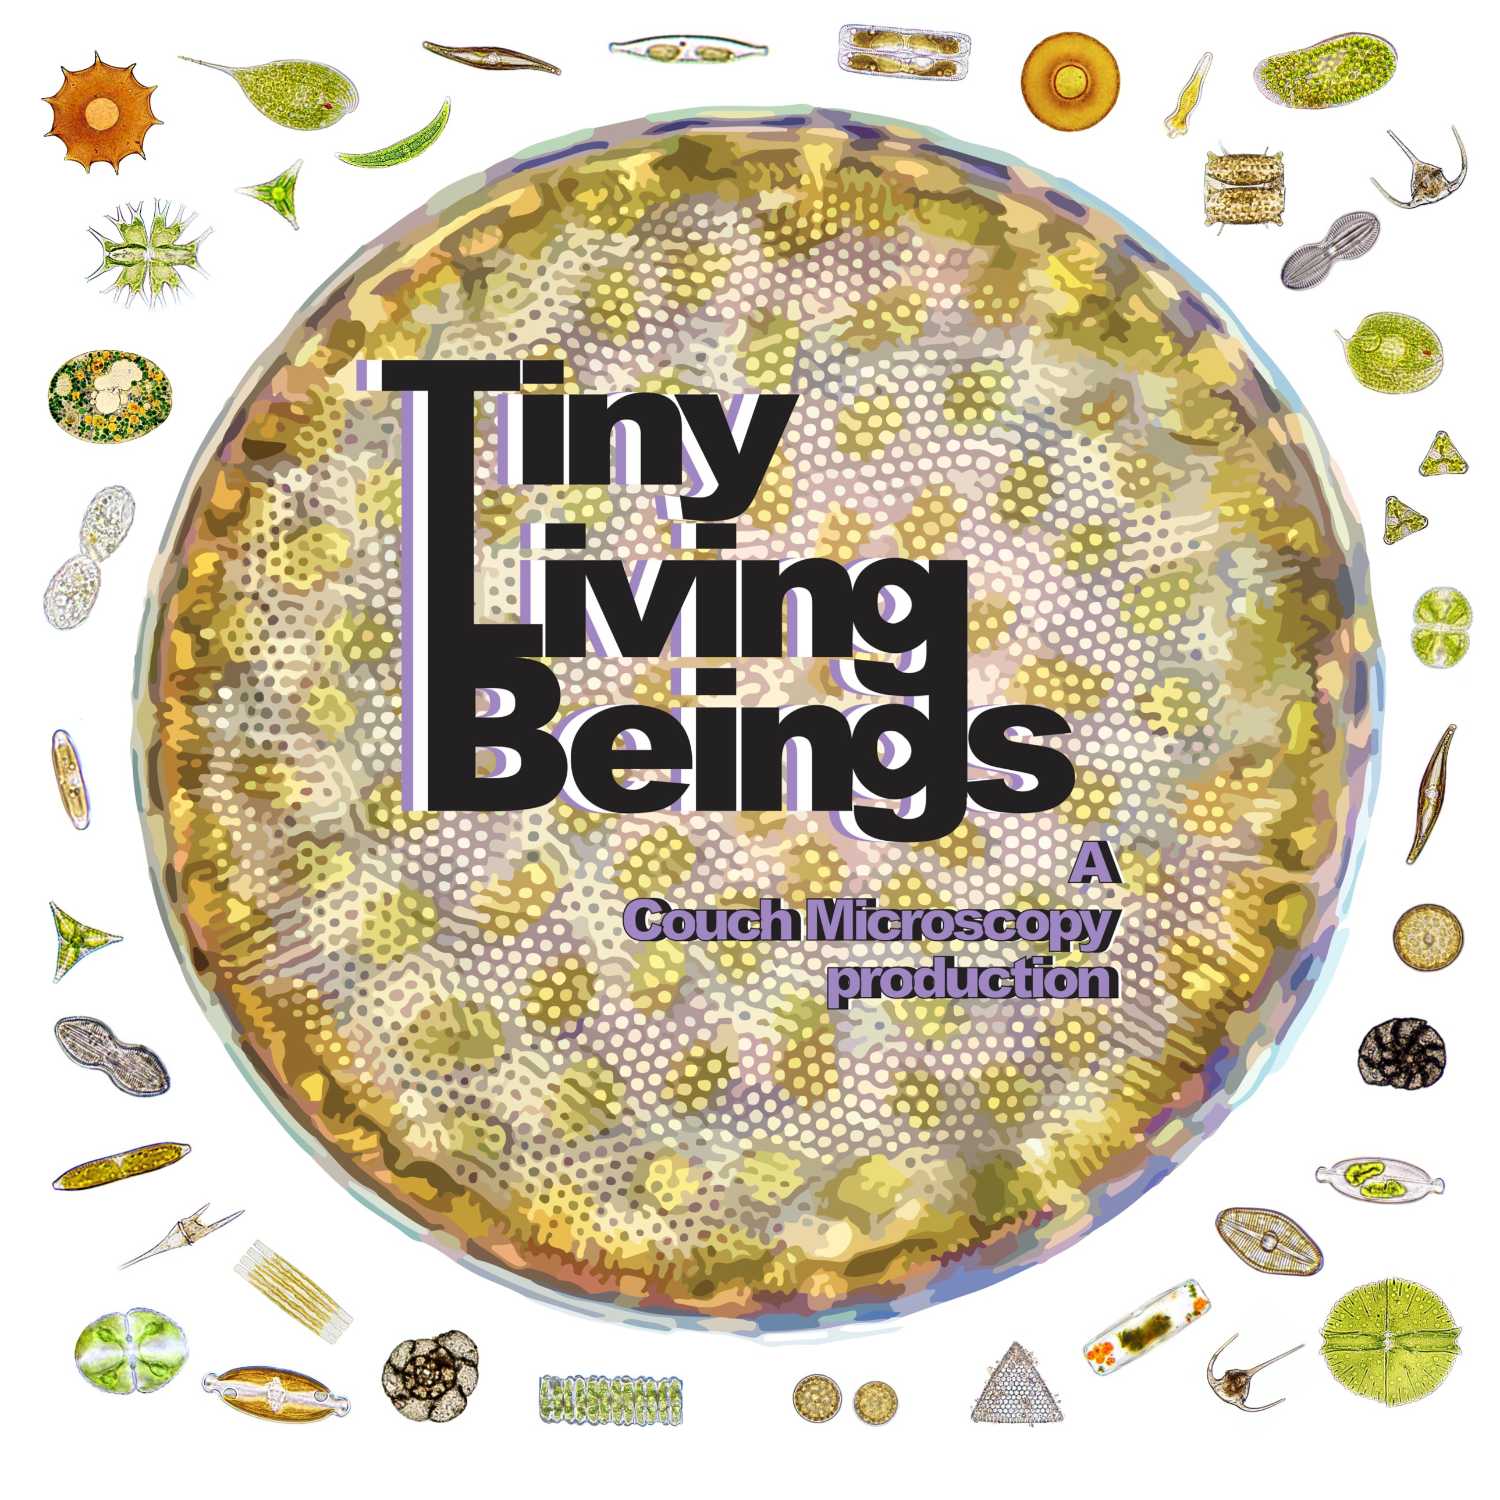 The microbes transforming our food system - with David Zilber